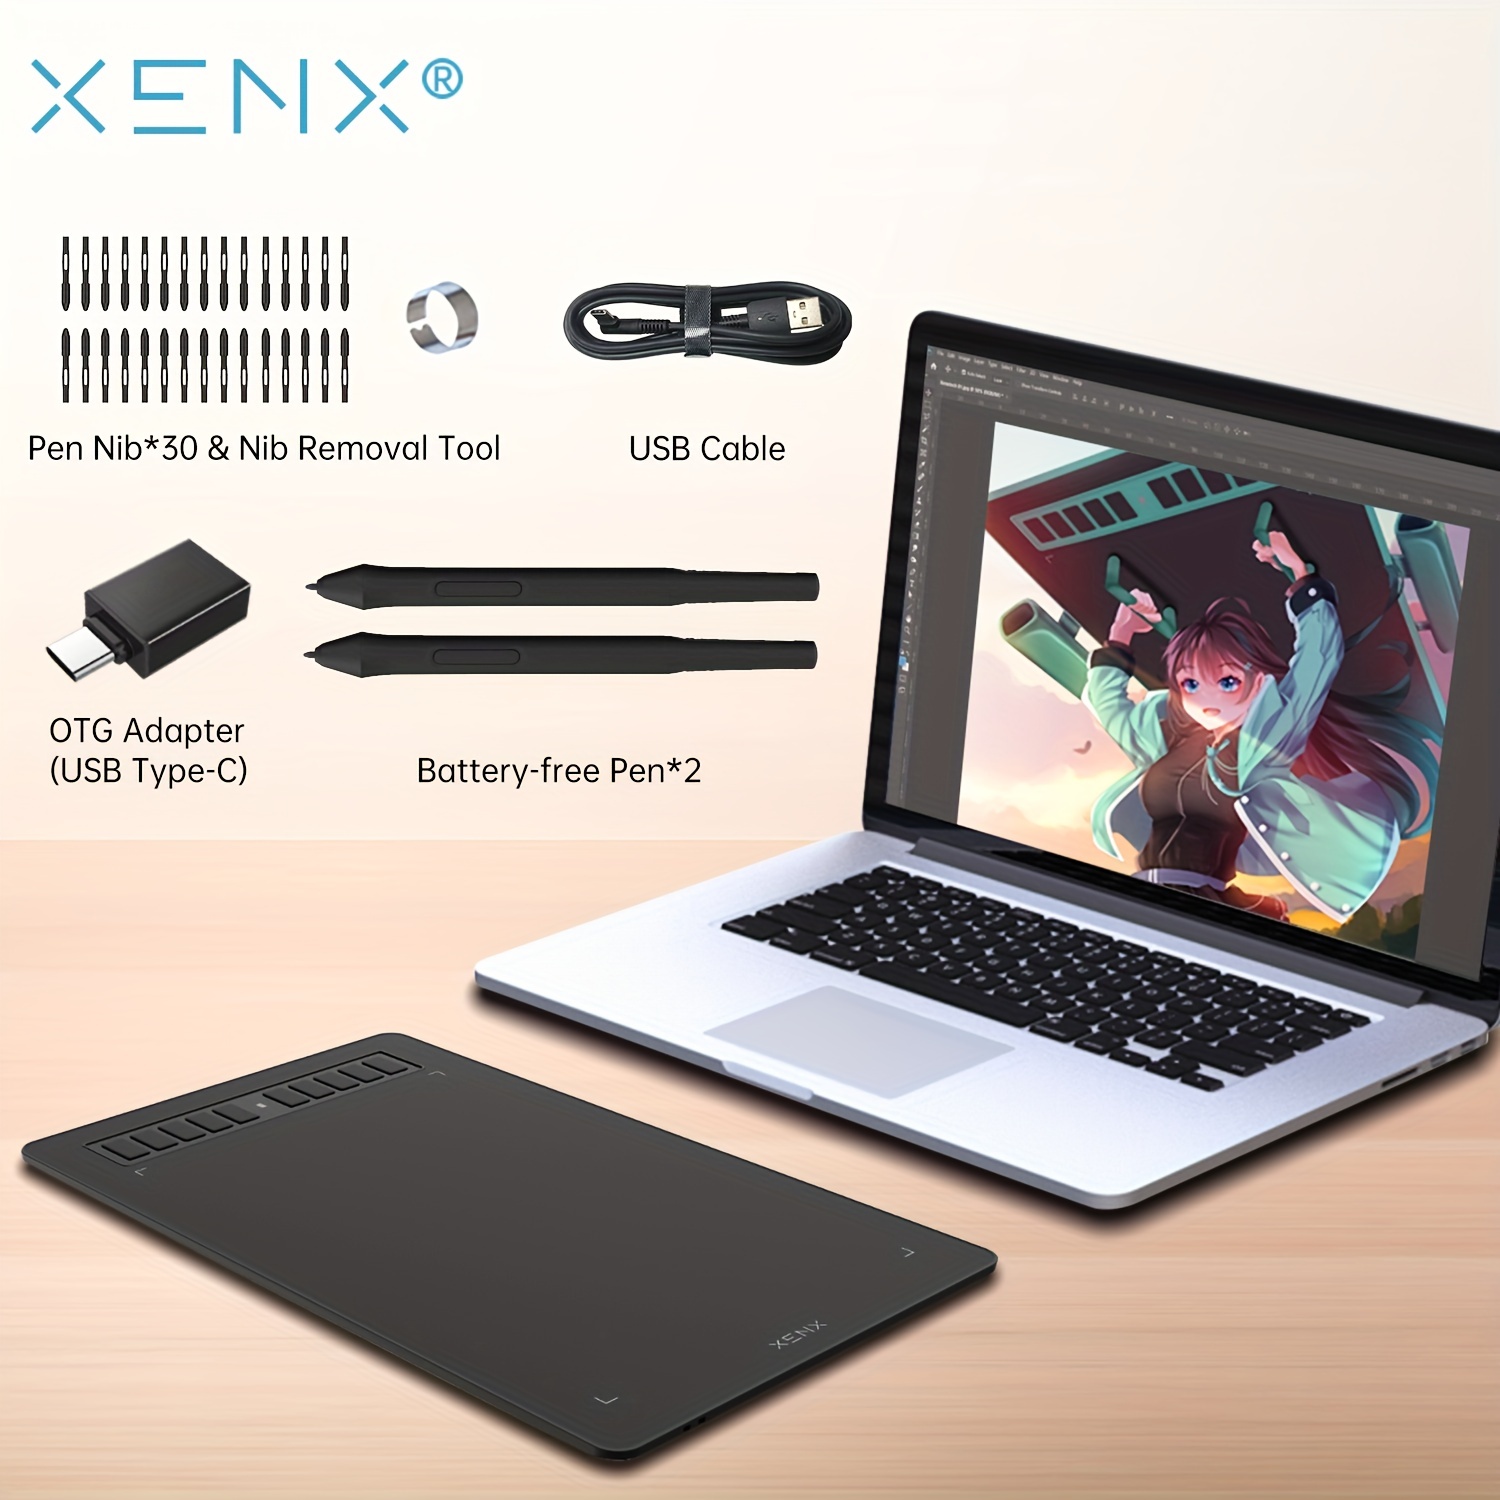 xenx p3 1060b 10 x 6 22 inch graphics drawing tablet 8192 levels pressure 10 hot keys battery free stylus compatible with mac windows android perfect for painting designing art creation